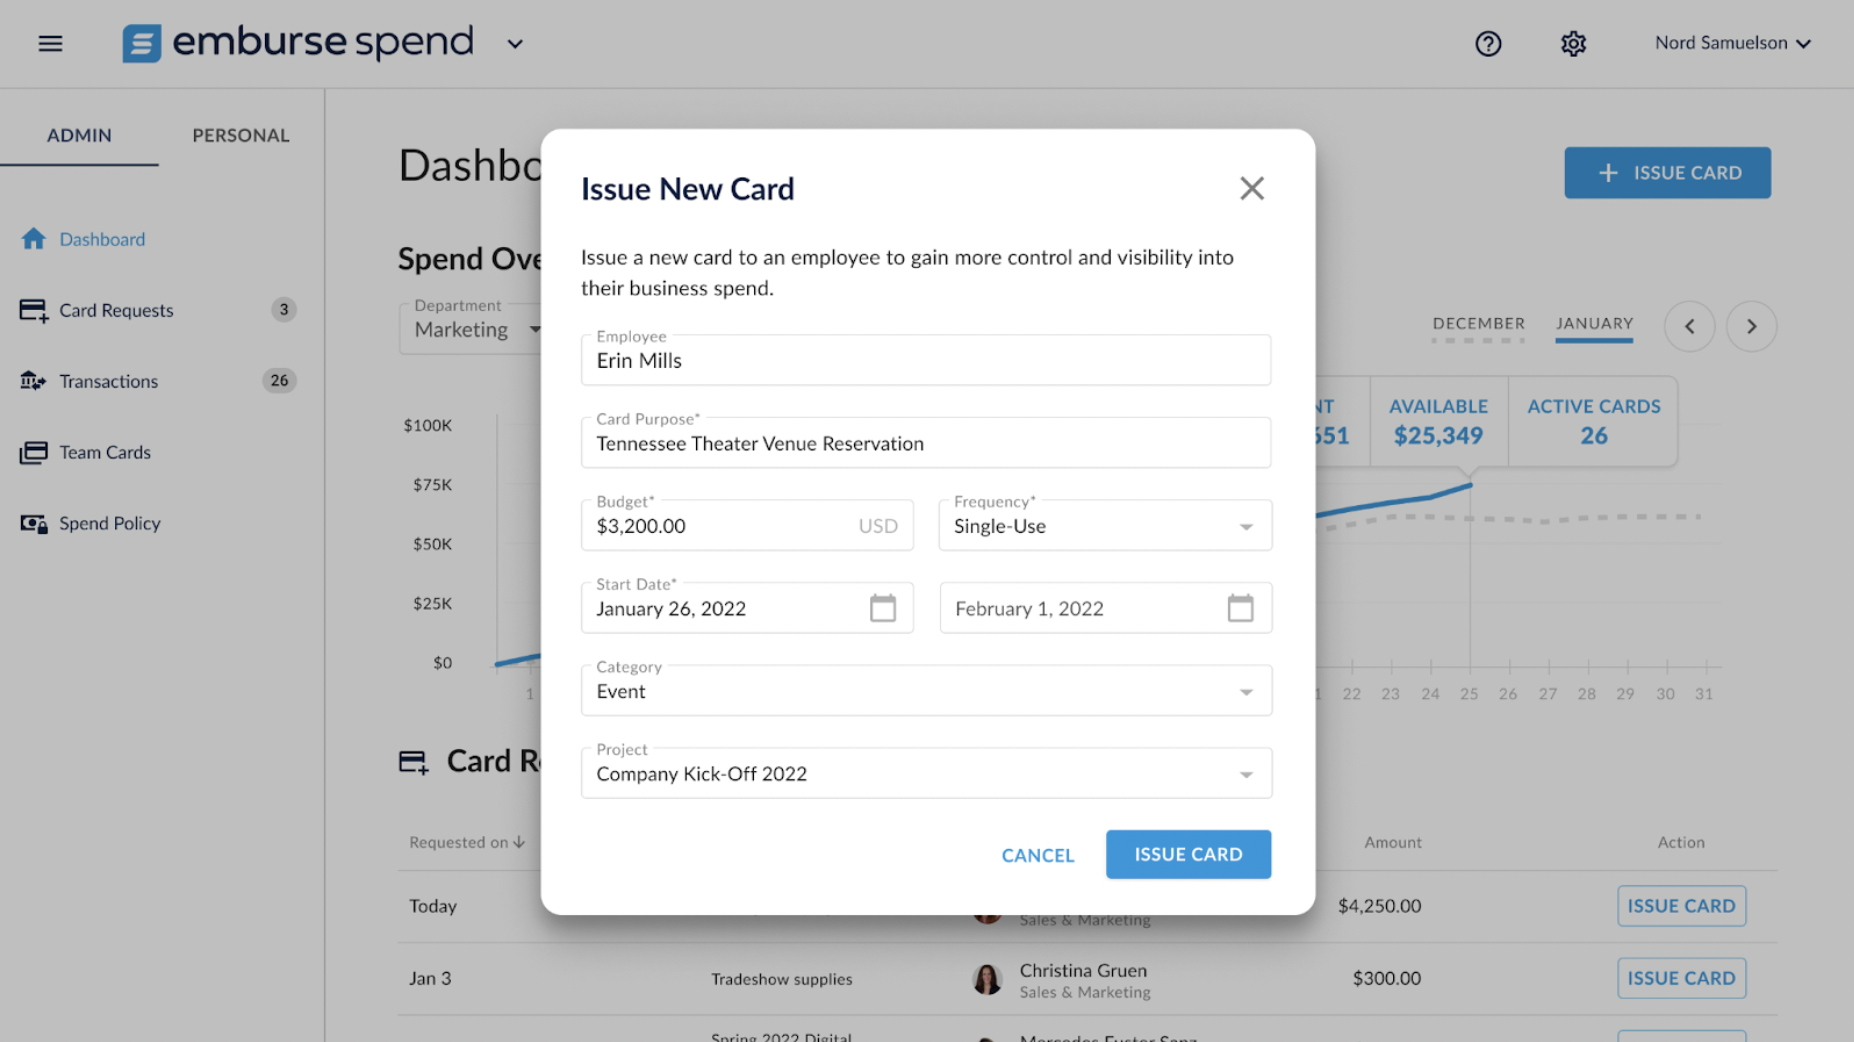 This is the card issuance module a budget manager uses to customize card controls, code budget details, and issue cards to employees.